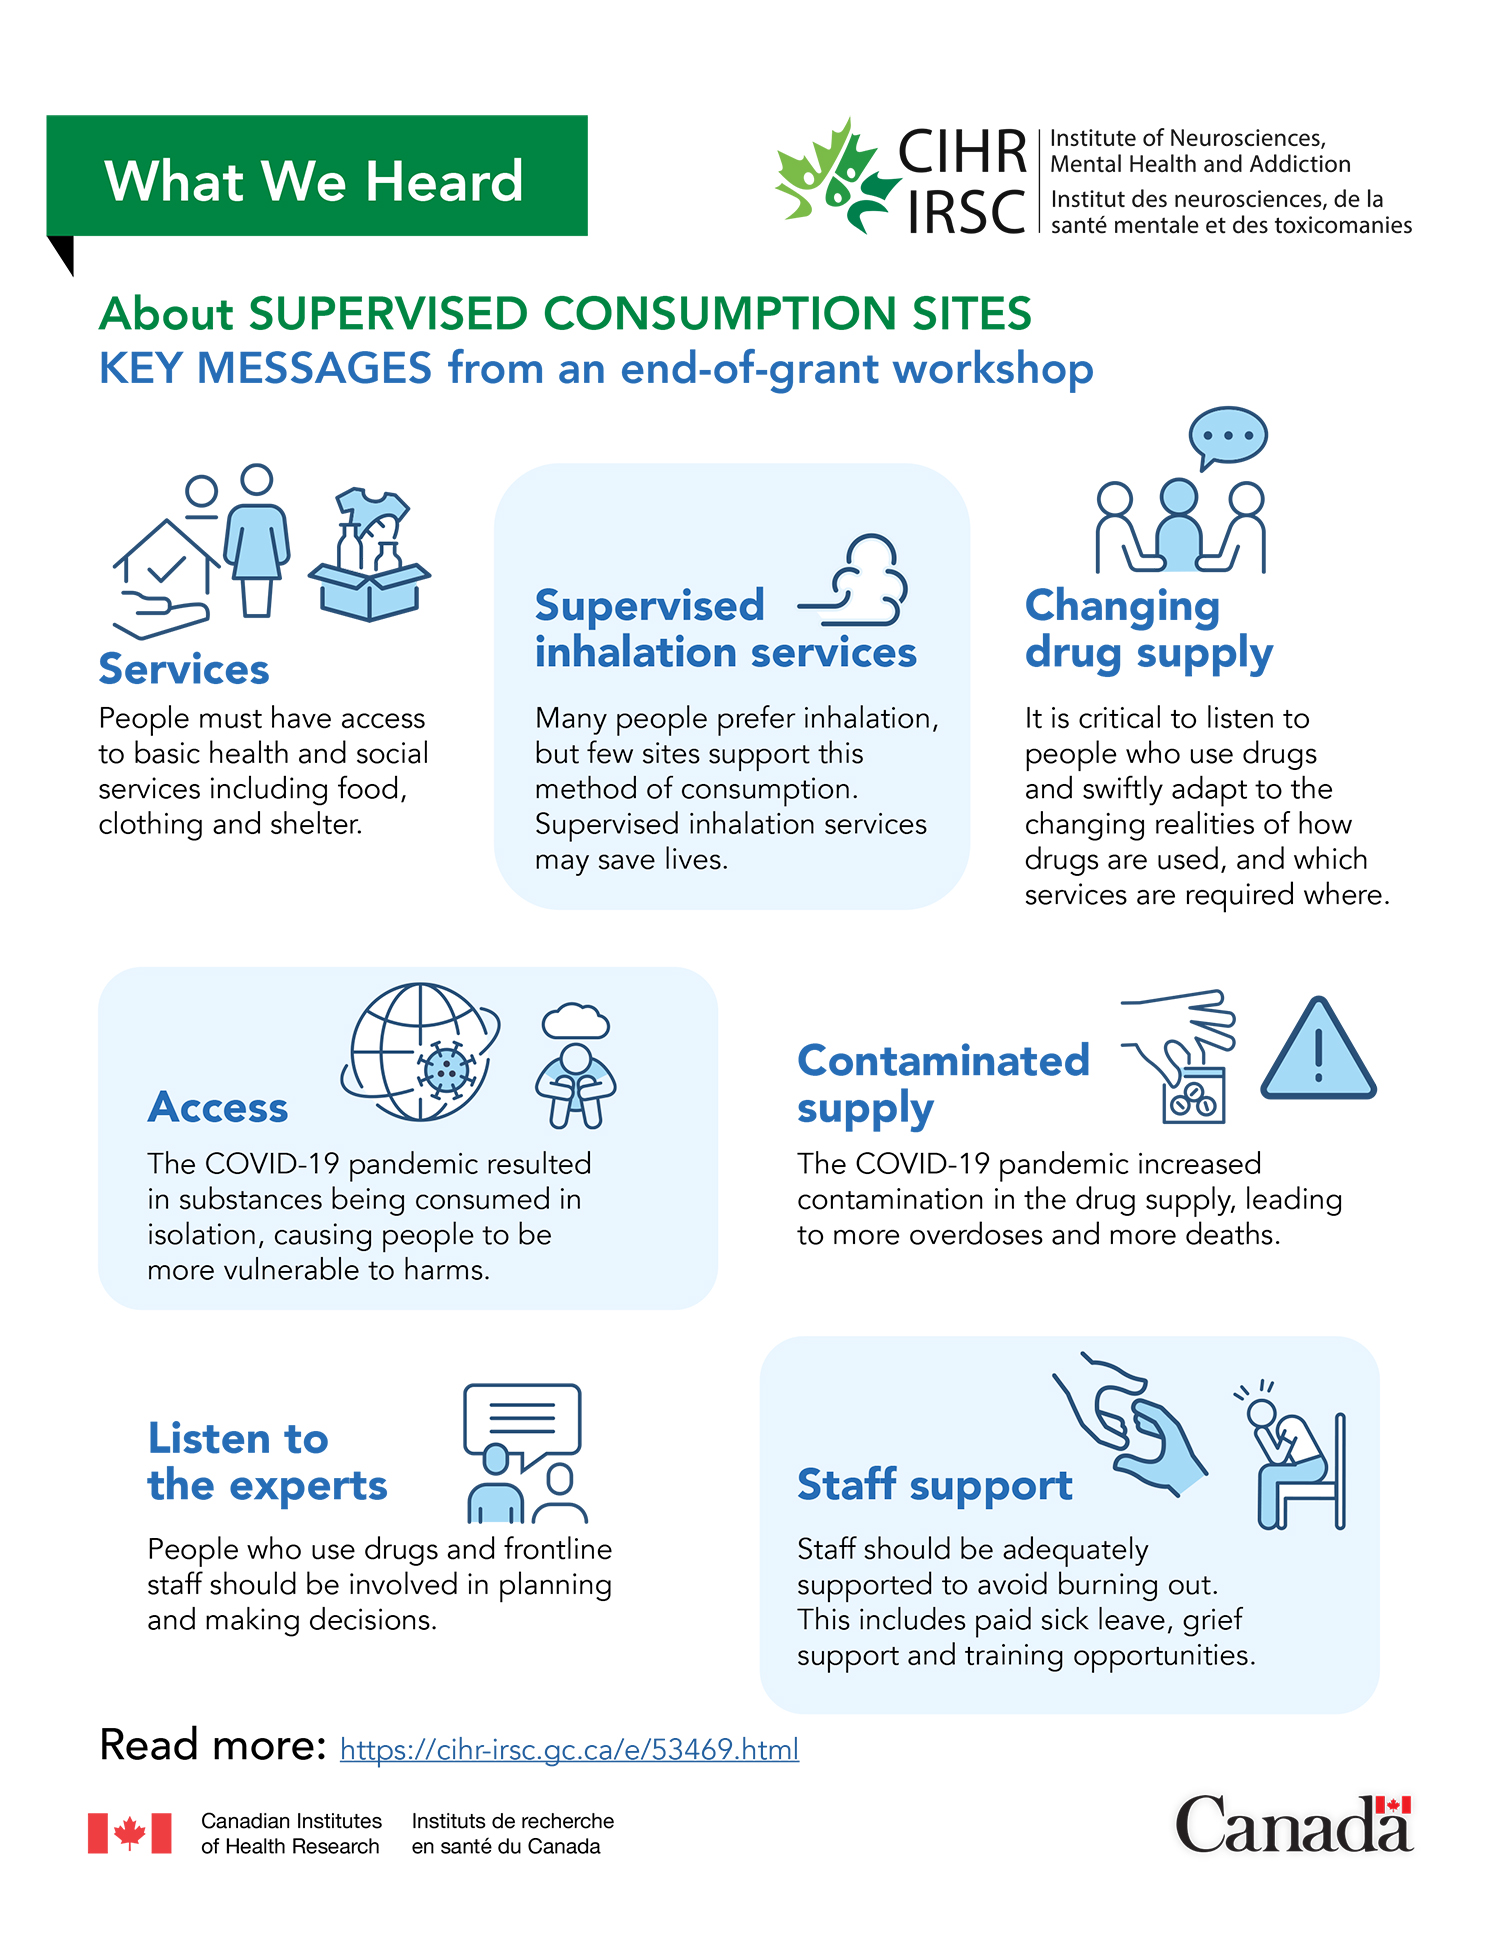 Infographic: Supervised consumption sites — Key messages from an end-of-grant workshop